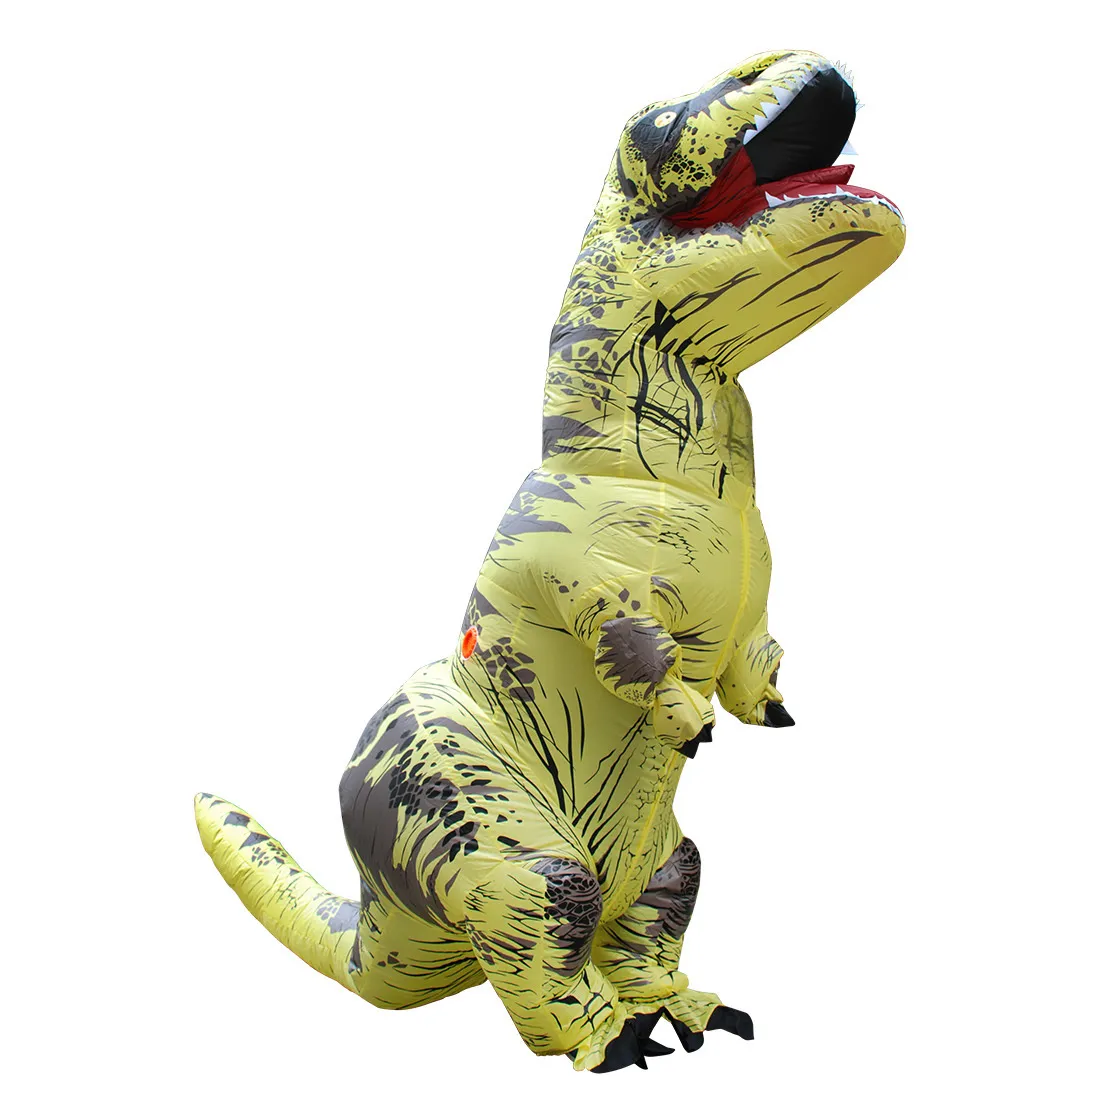 T-rex Dinosaur Inflatable Costume Party Cosplay Costumes Fancy Mascot Anime  Halloween Costume For Adult Kids Dino Cartoon Cosplay Costumes AliExpress |  Hot T Rex Dinosaur Inflatable Costume Party Cosplay Costumes Fancy Mascot